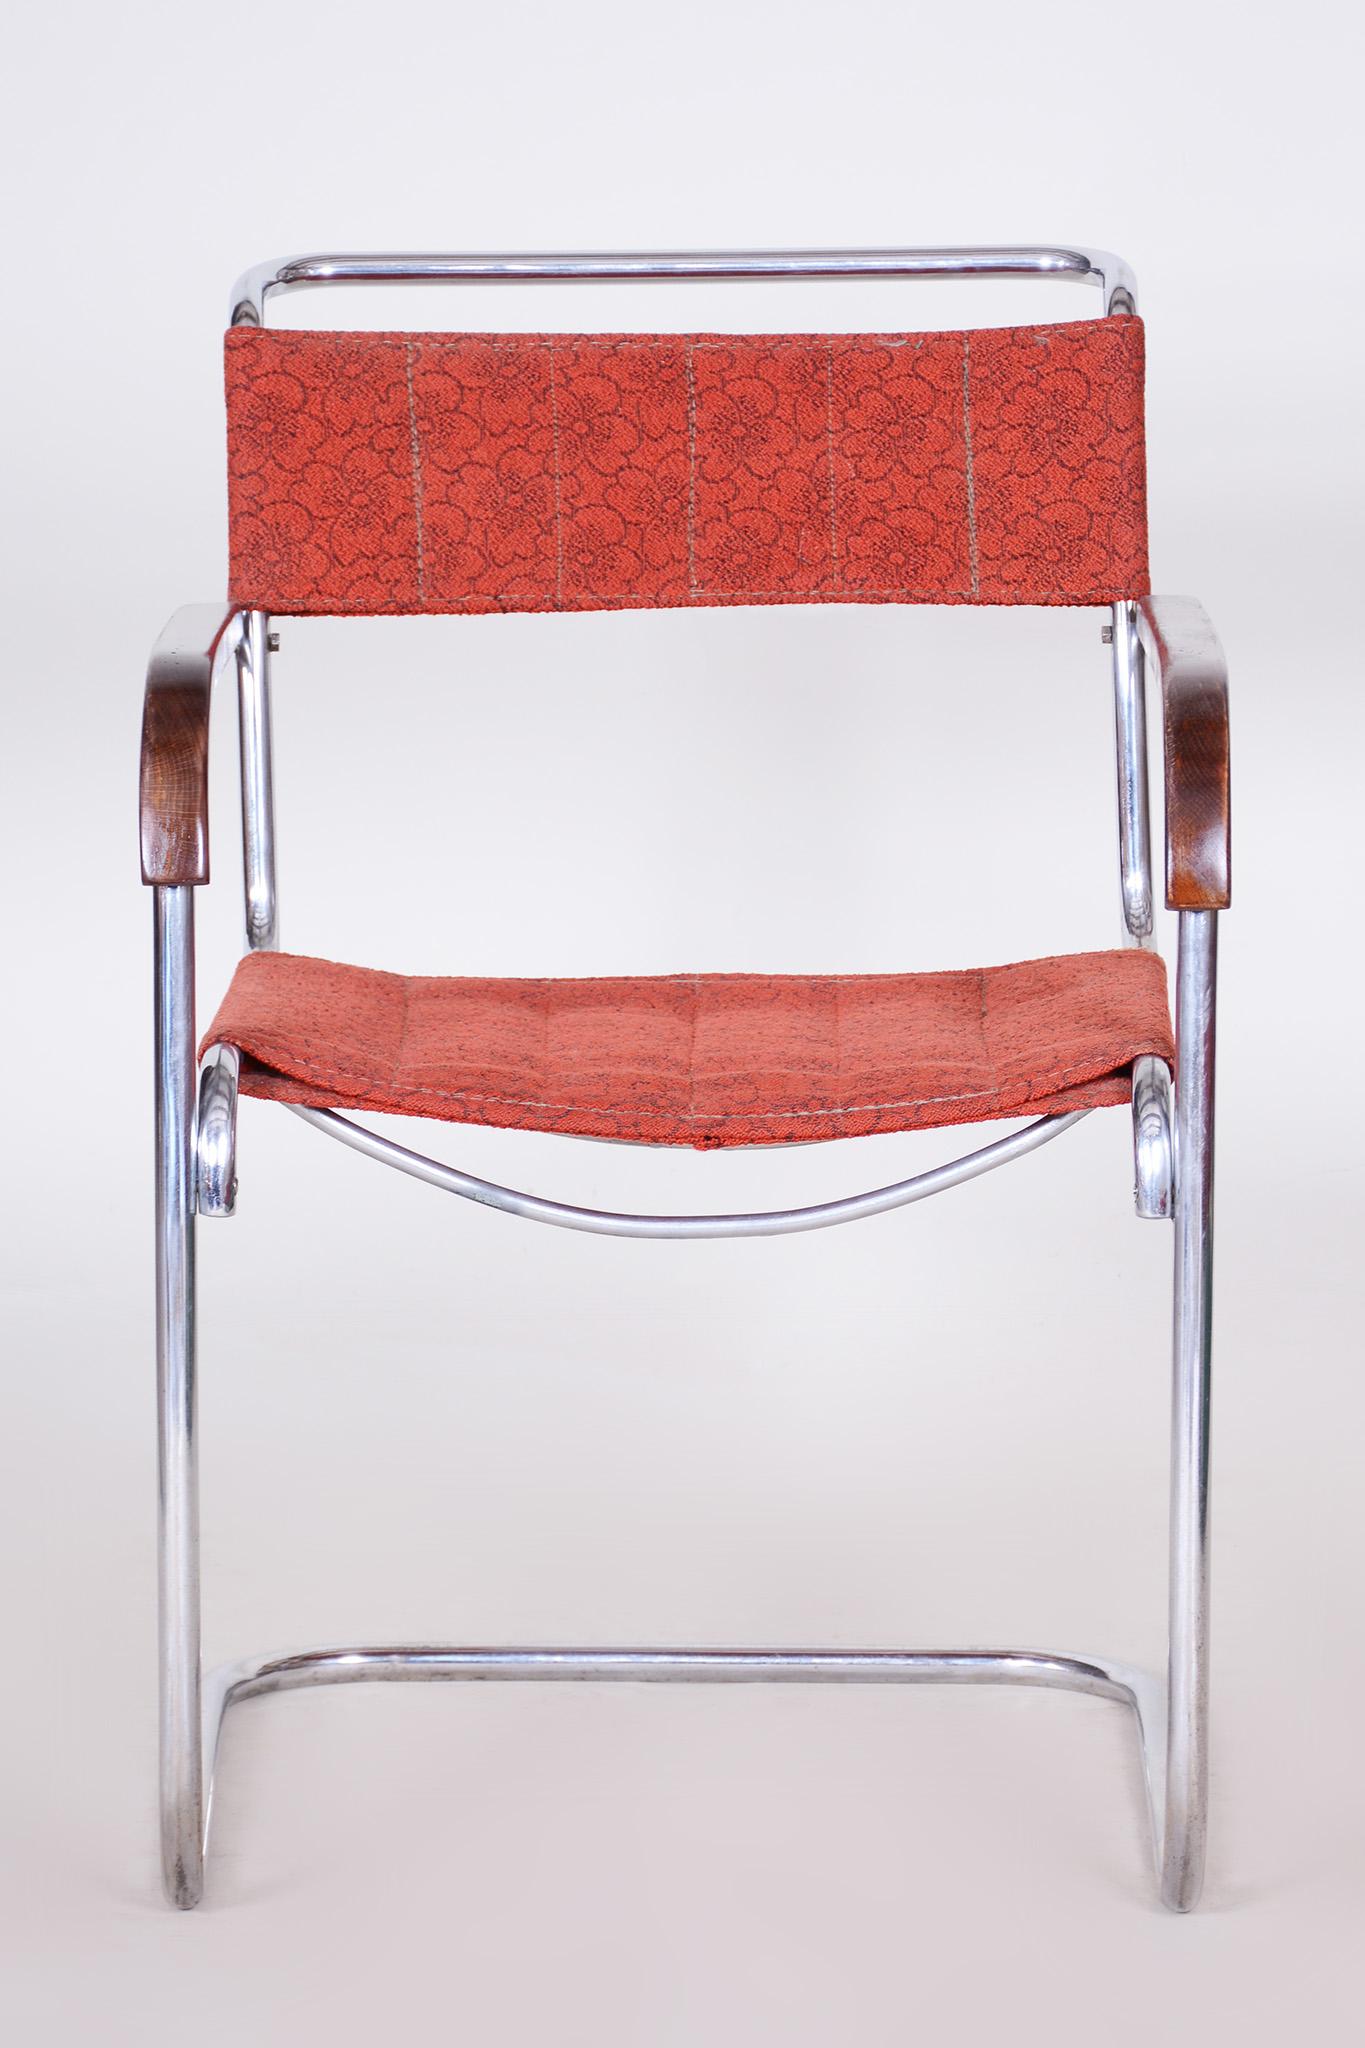 Red Bauhaus armchair designed by Marcel Breuer.

Style: Bauhaus
Period: 1930-1939
Source: Czechia
Maker: Mücke - Melder
Material: Beech, Chrome-plated steel.

Very well-preserved original condition.
Completely professionally cleaned.